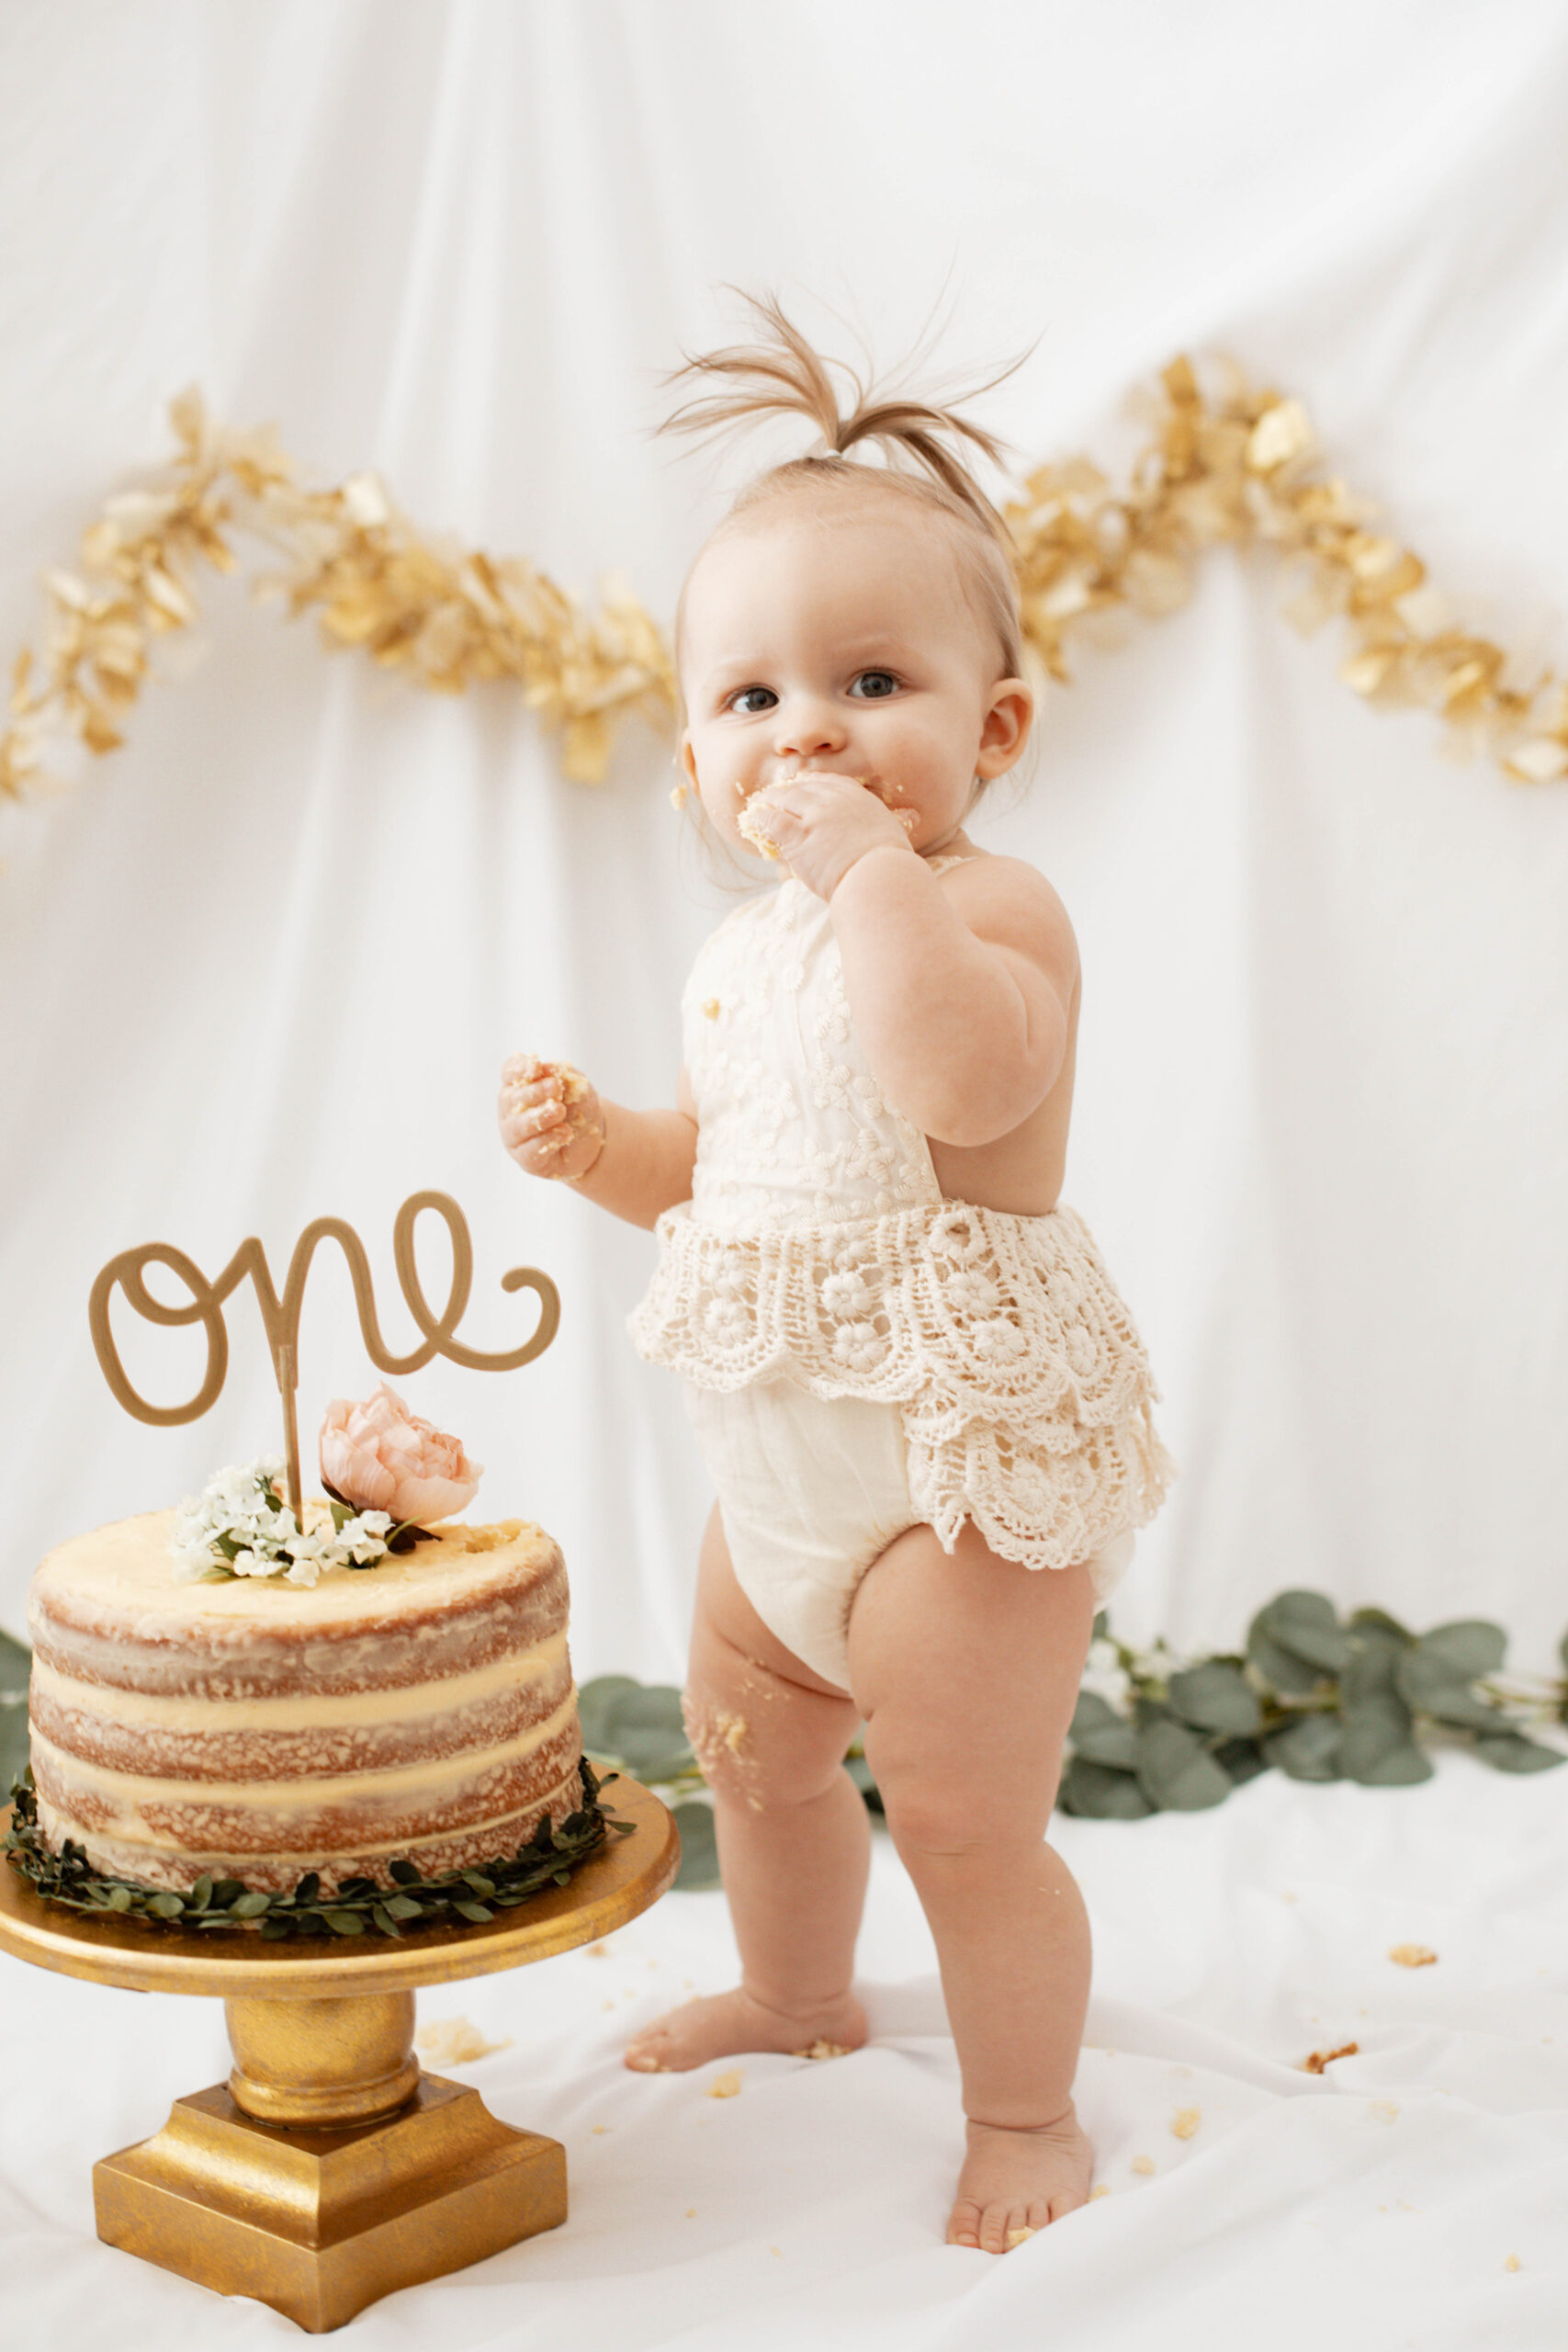 7 Tips For A Successful DIY Smash Cake Photoshoot - Coffee With Summer